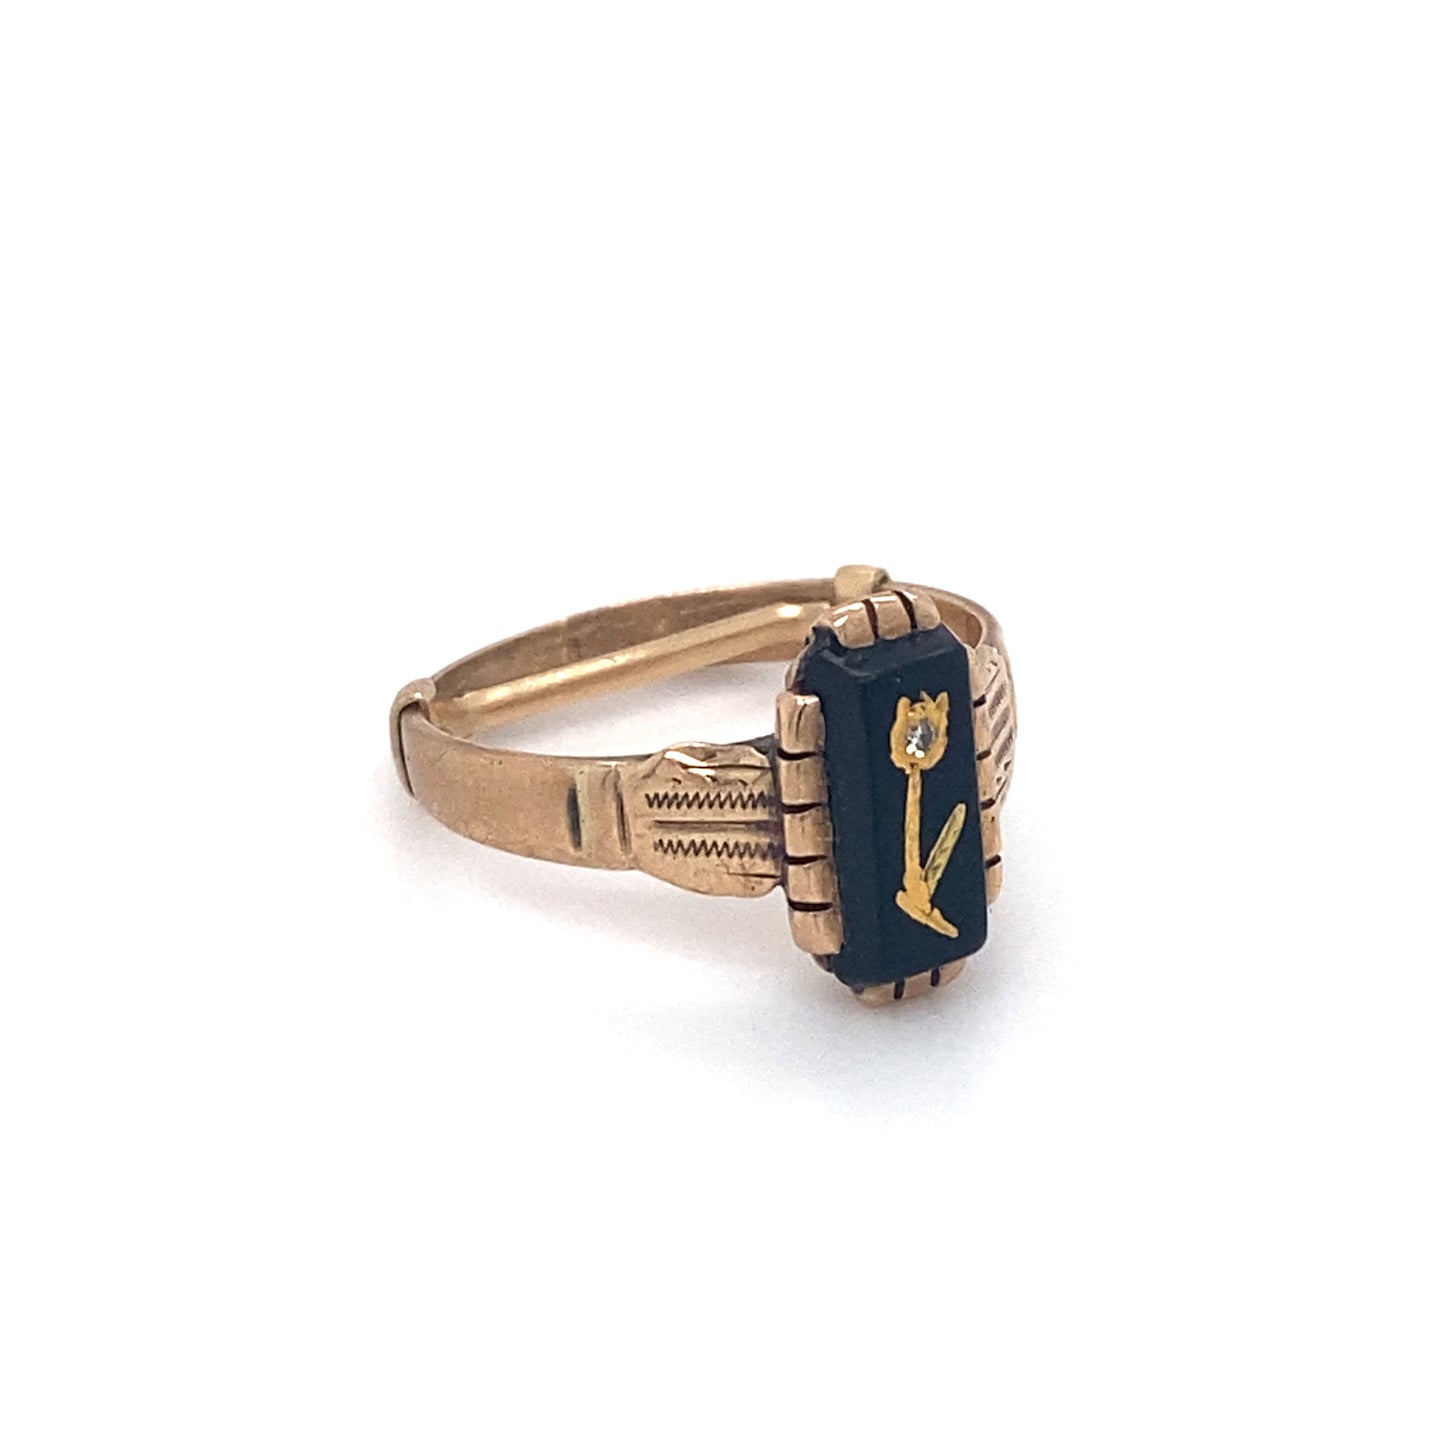 Circa 1890s Victorian Inlaid Onyx and Diamond Rose Motif Ring in 10K Gold